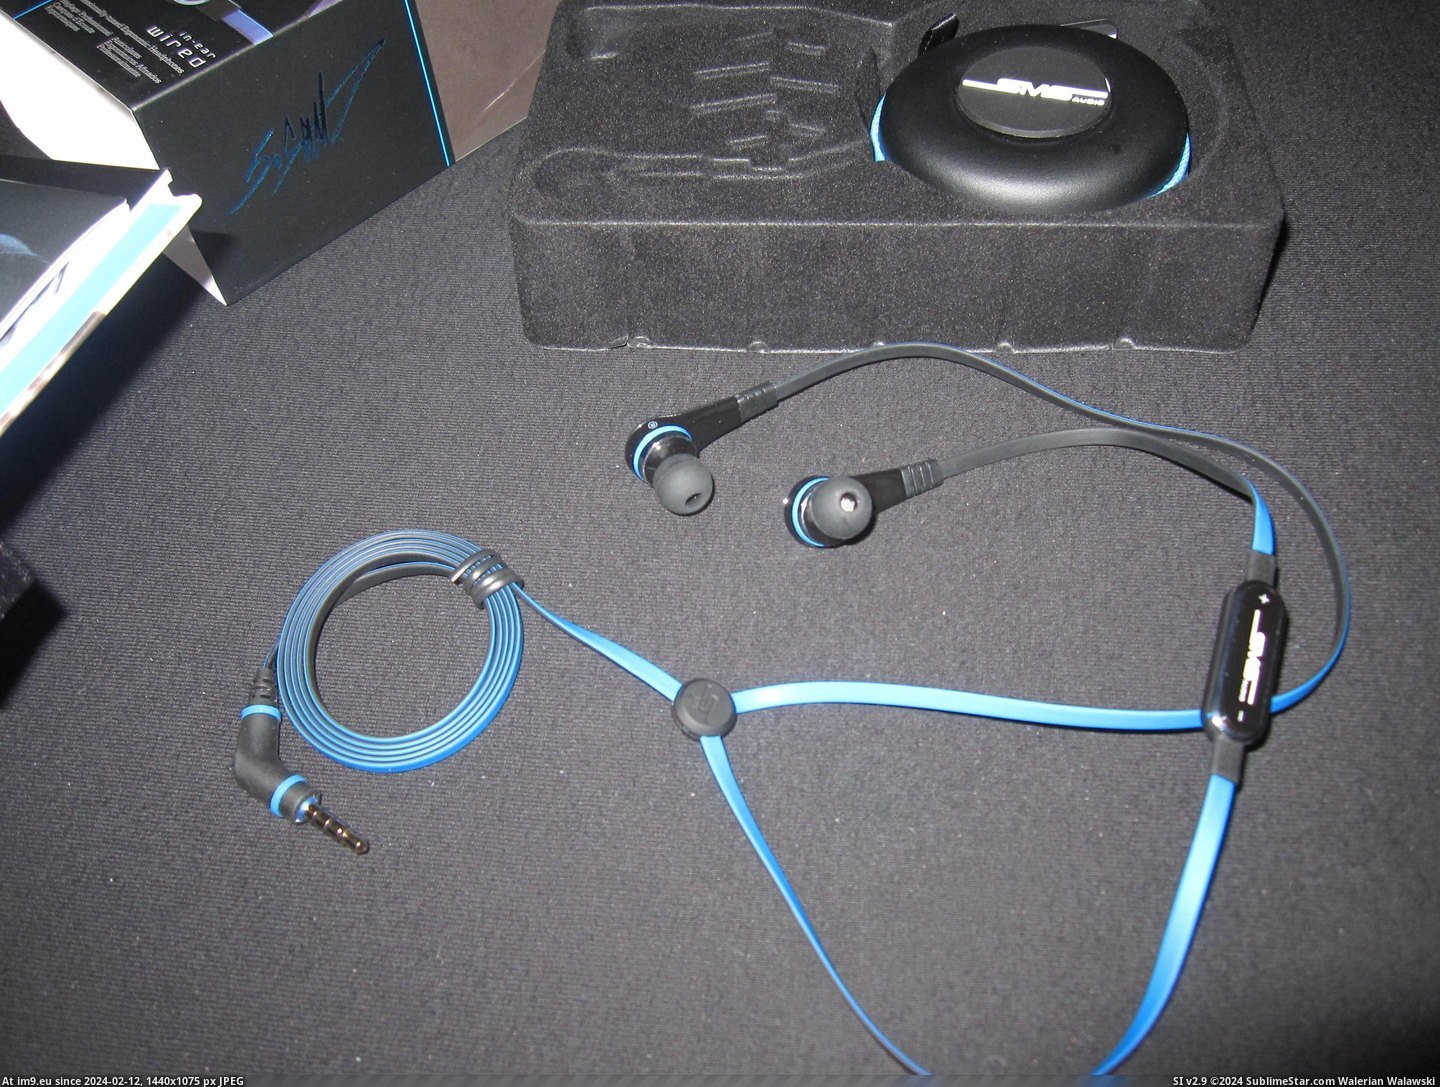  #Sms  IMG_1340 Pic. (Image of album SMS Audio Street))